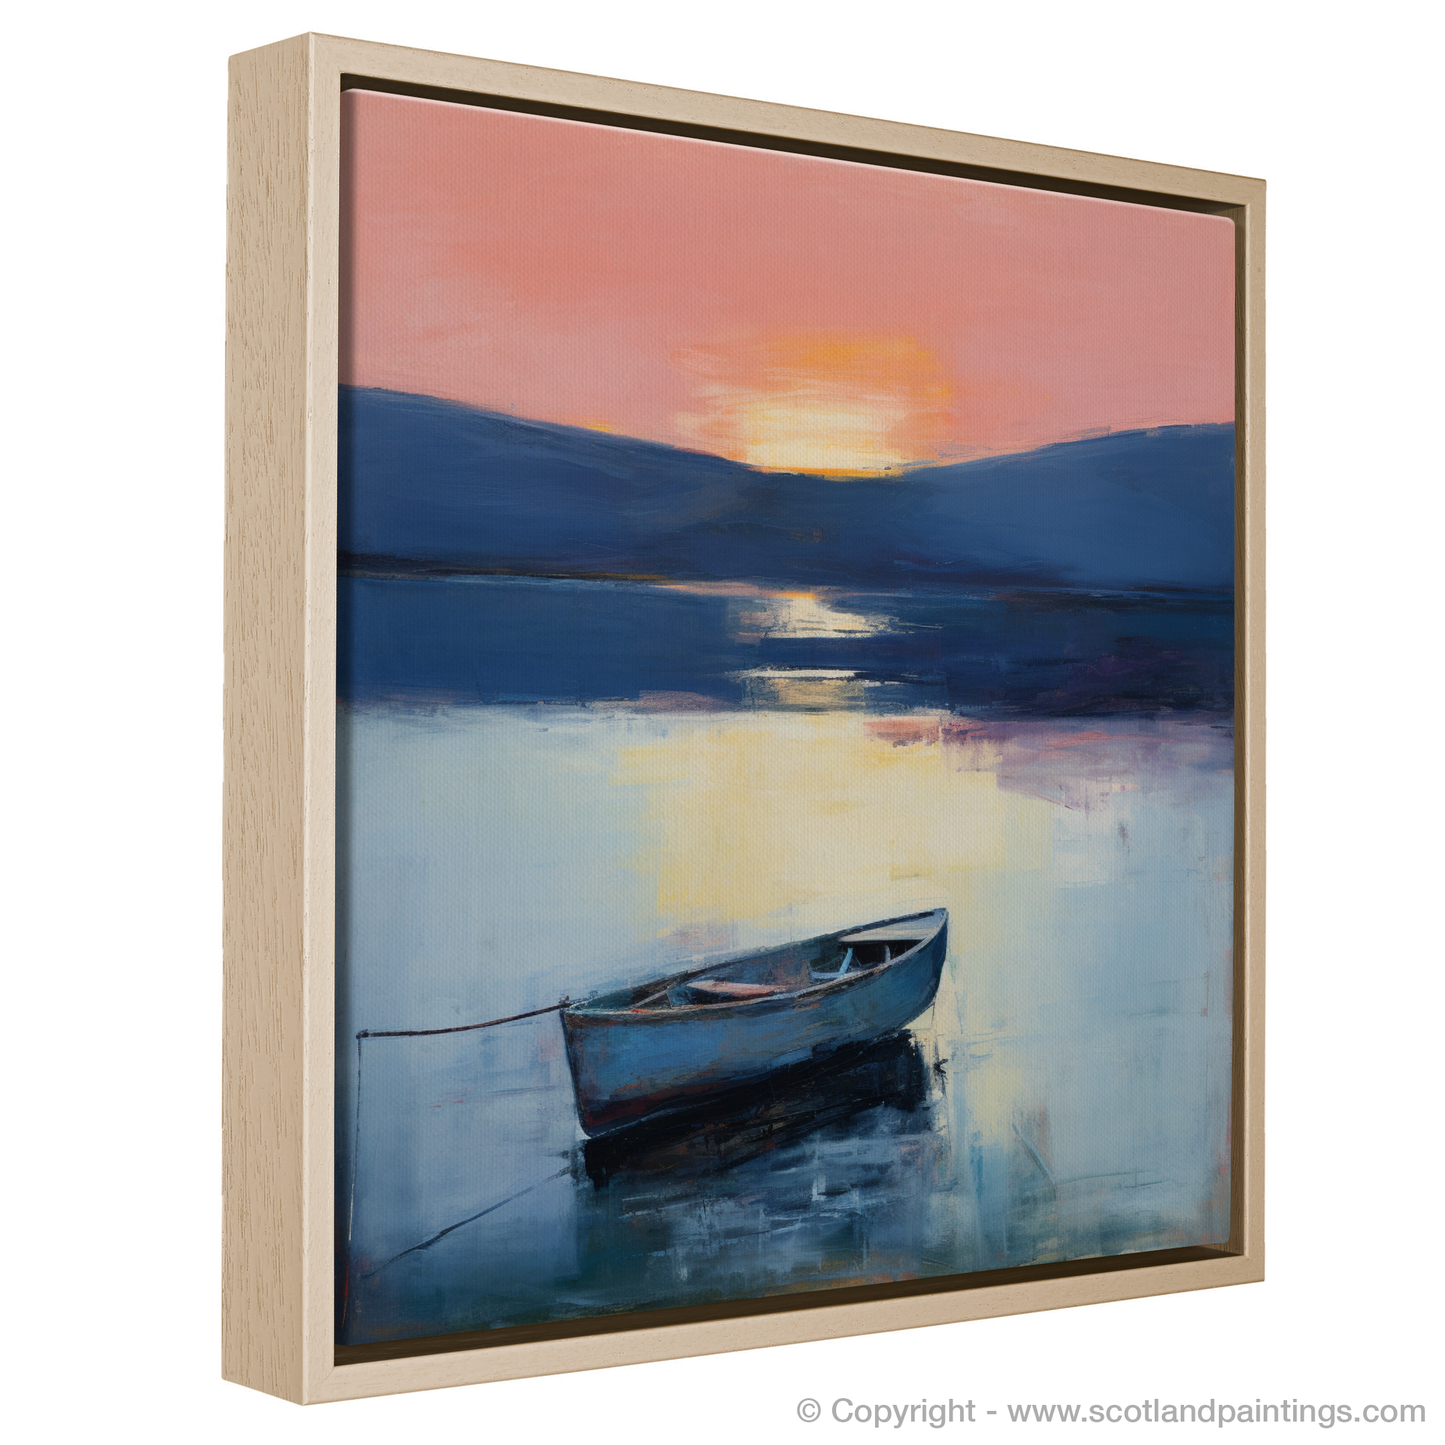 Painting and Art Print of Lone rowboat on Loch Lomond at dusk entitled "Dusk Embrace on Loch Lomond".